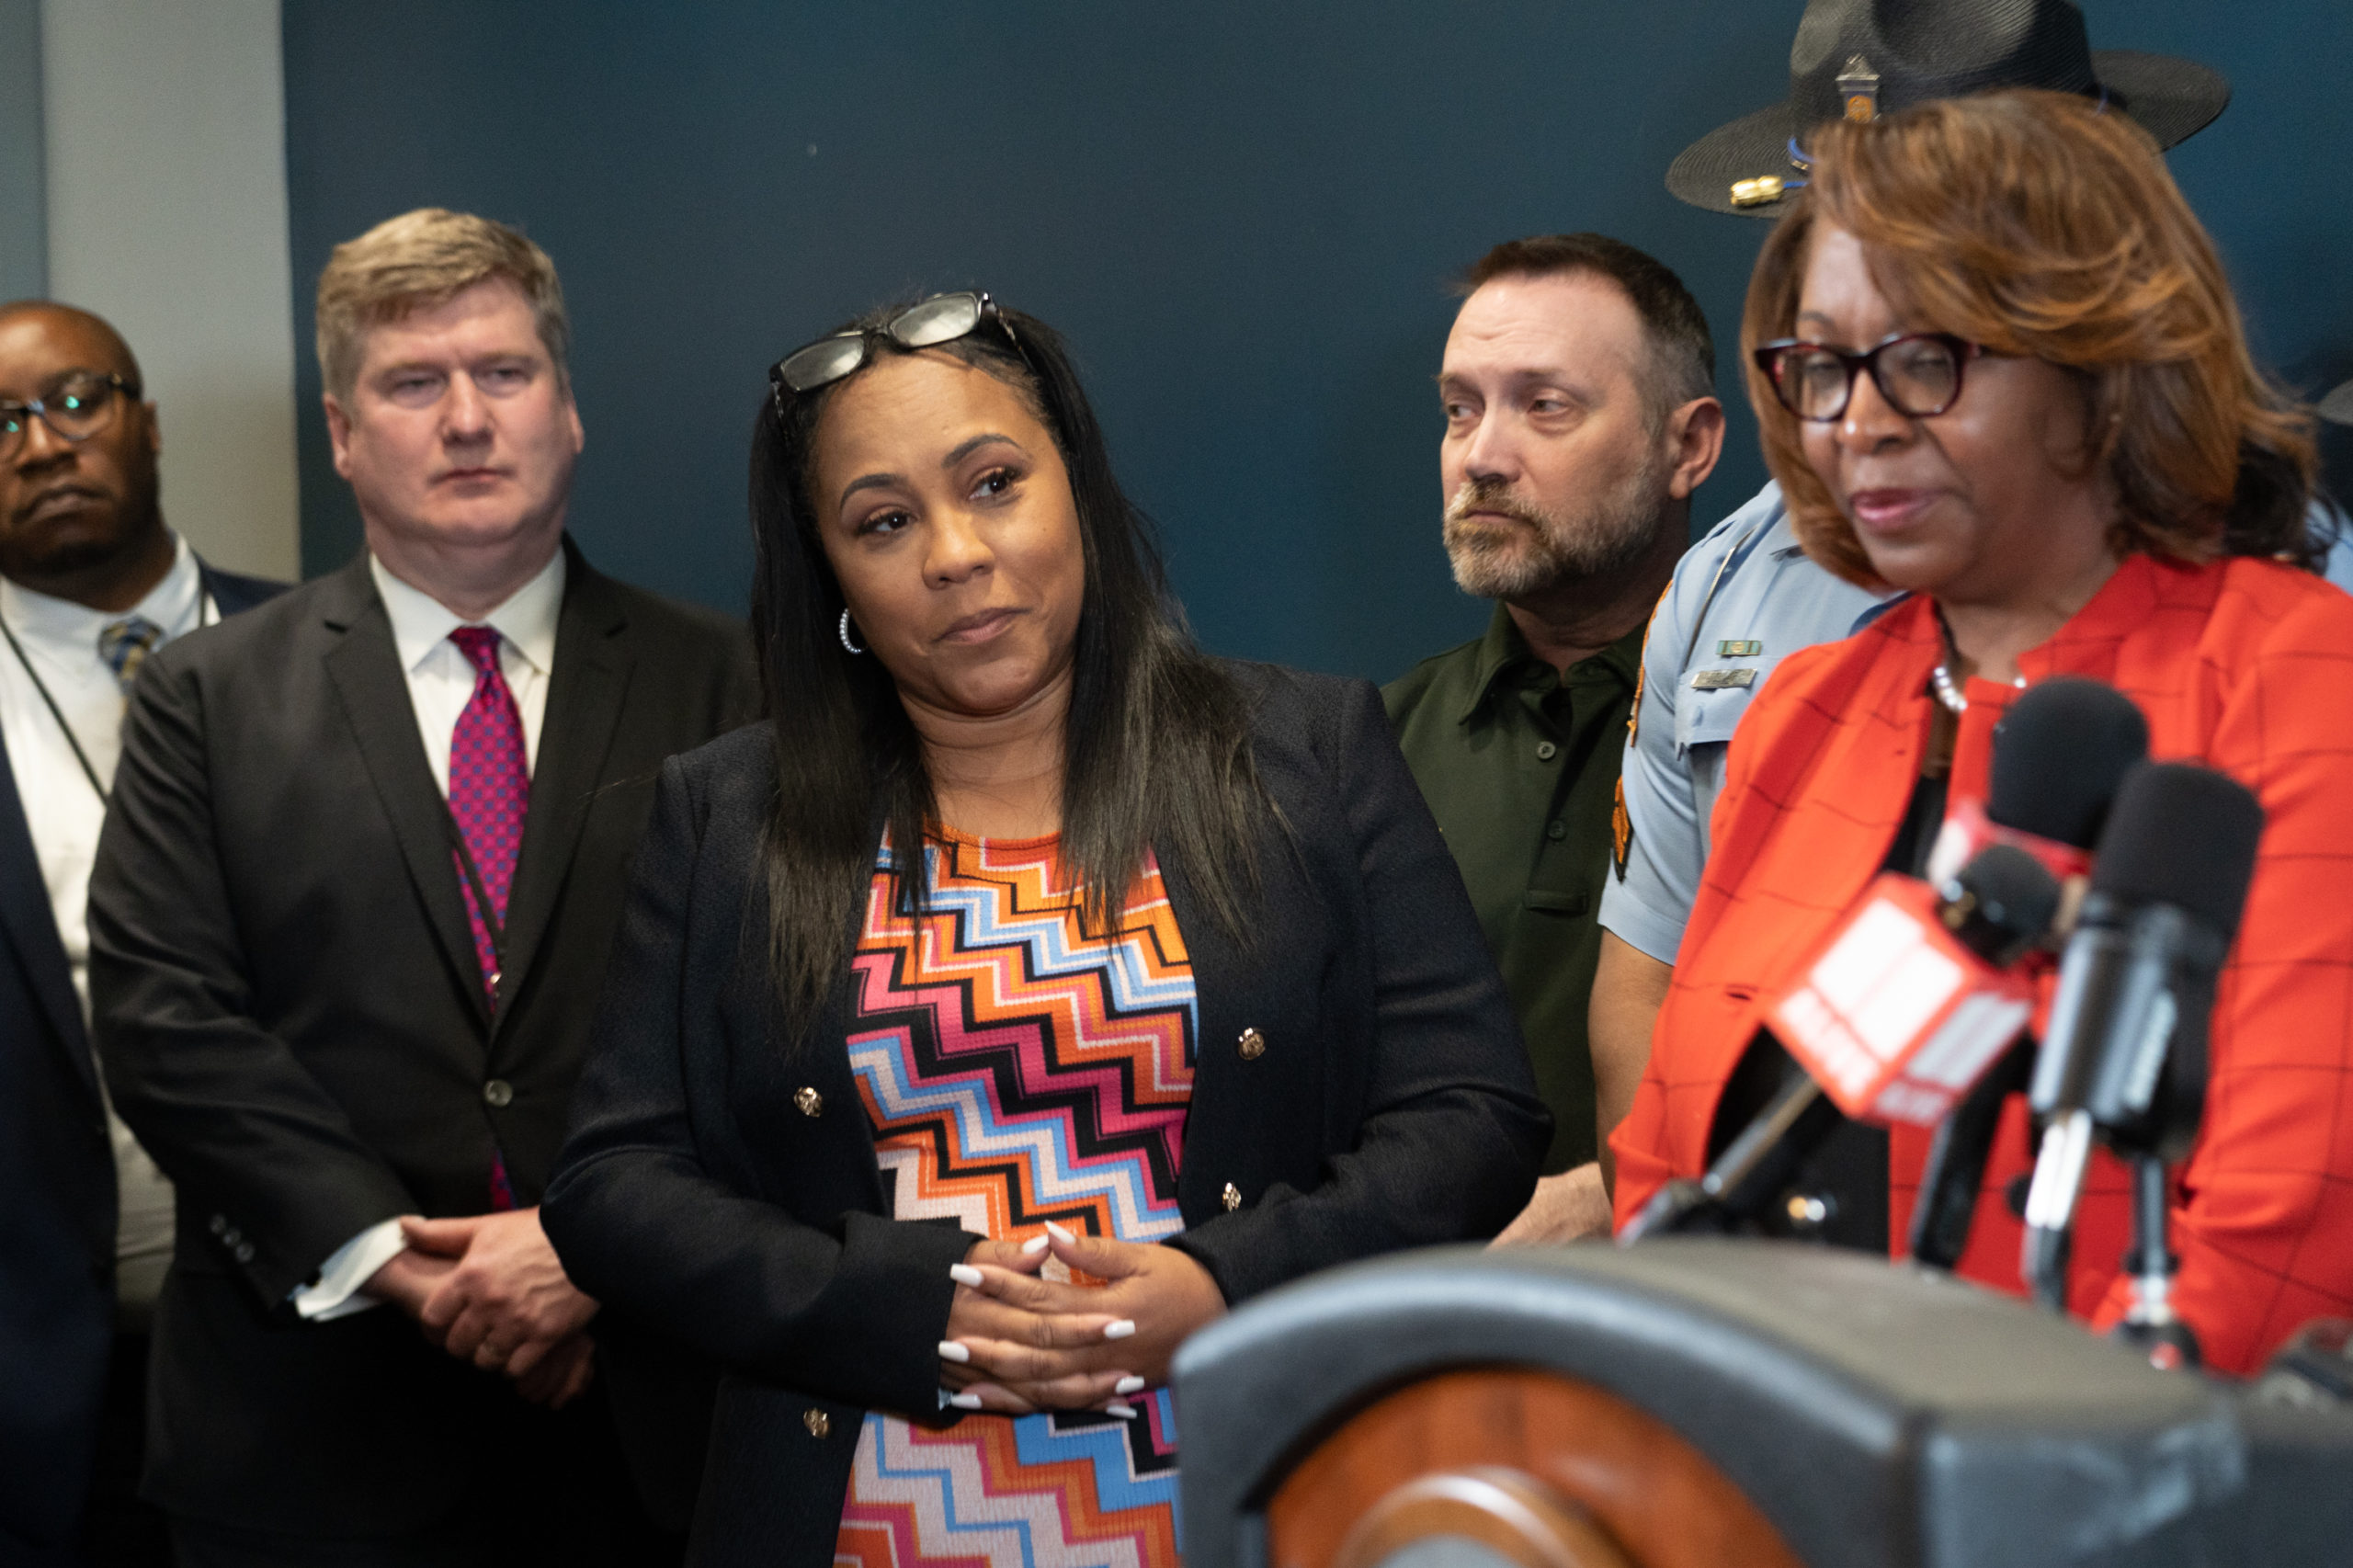 Fulton County District Attorney Fani Willis (C) attends a press conference at the Atlanta Police headquarters following a shooting at Northside Hospital medical facility on May 3, 2023 in Atlanta, Georgia. (Photo by Megan Varner/Getty Images)